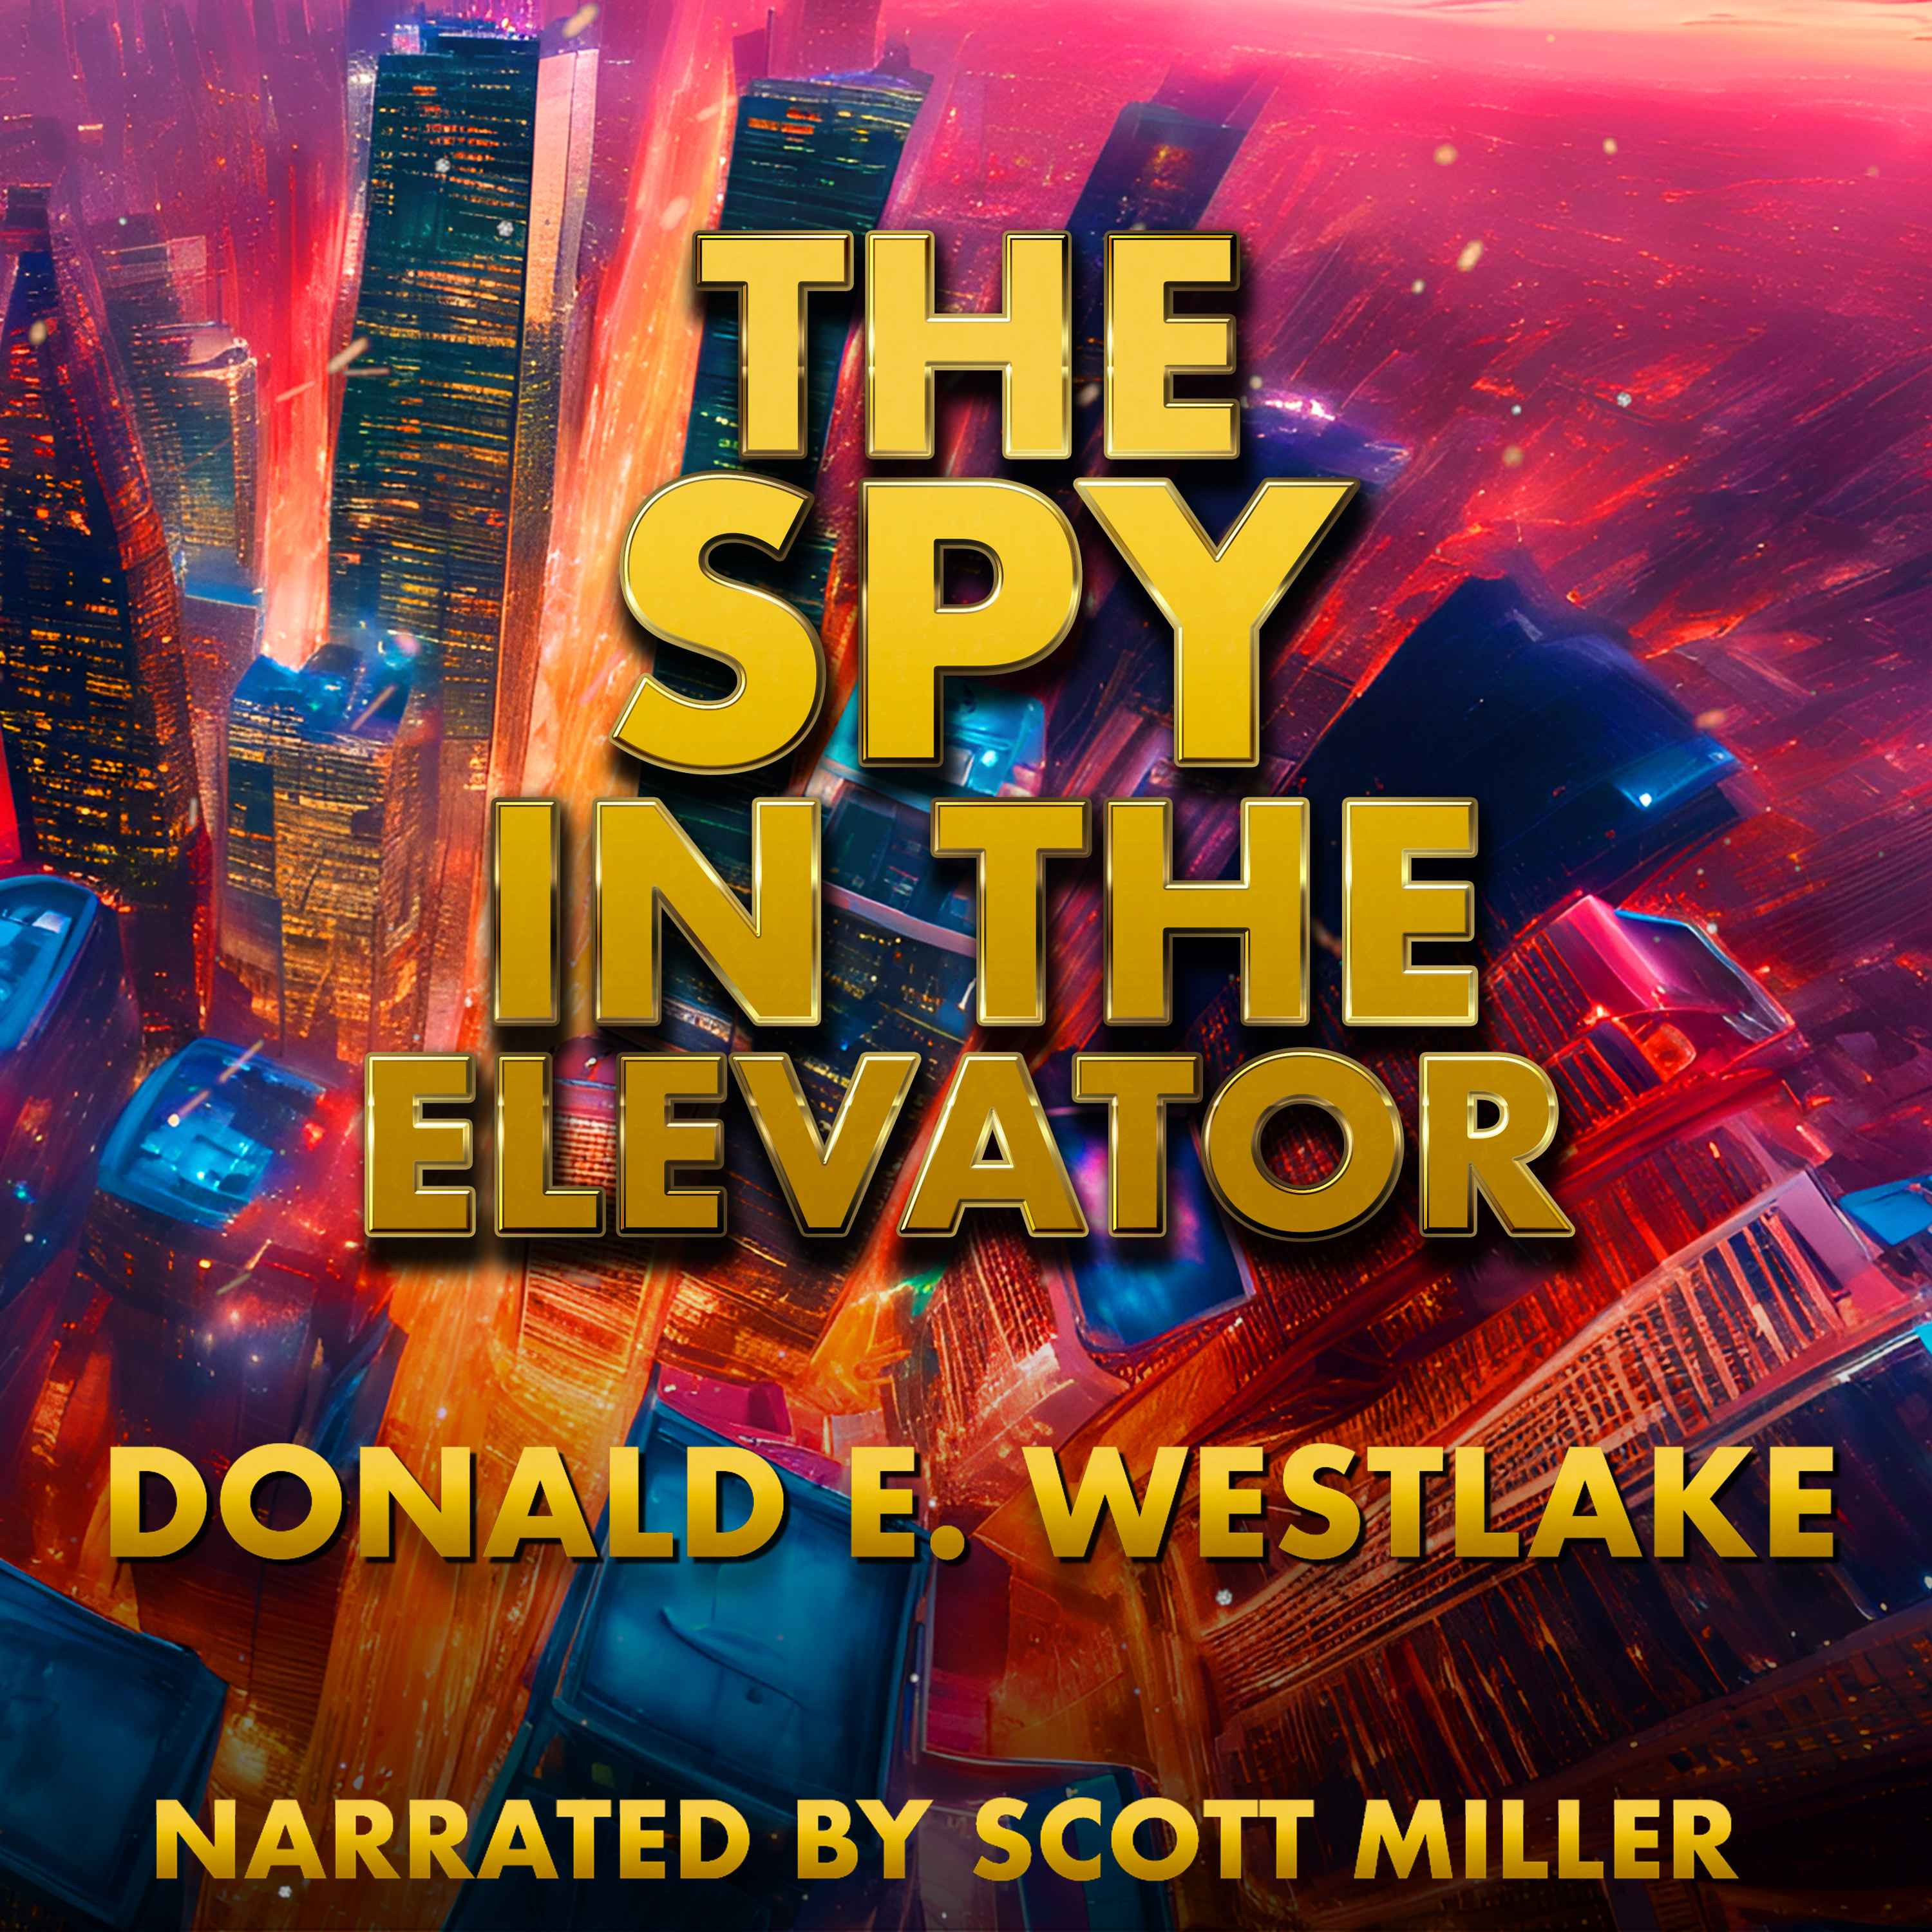 The Spy in the Elevator by Donald E. Westlake - Apocalyptic Sci-Fi